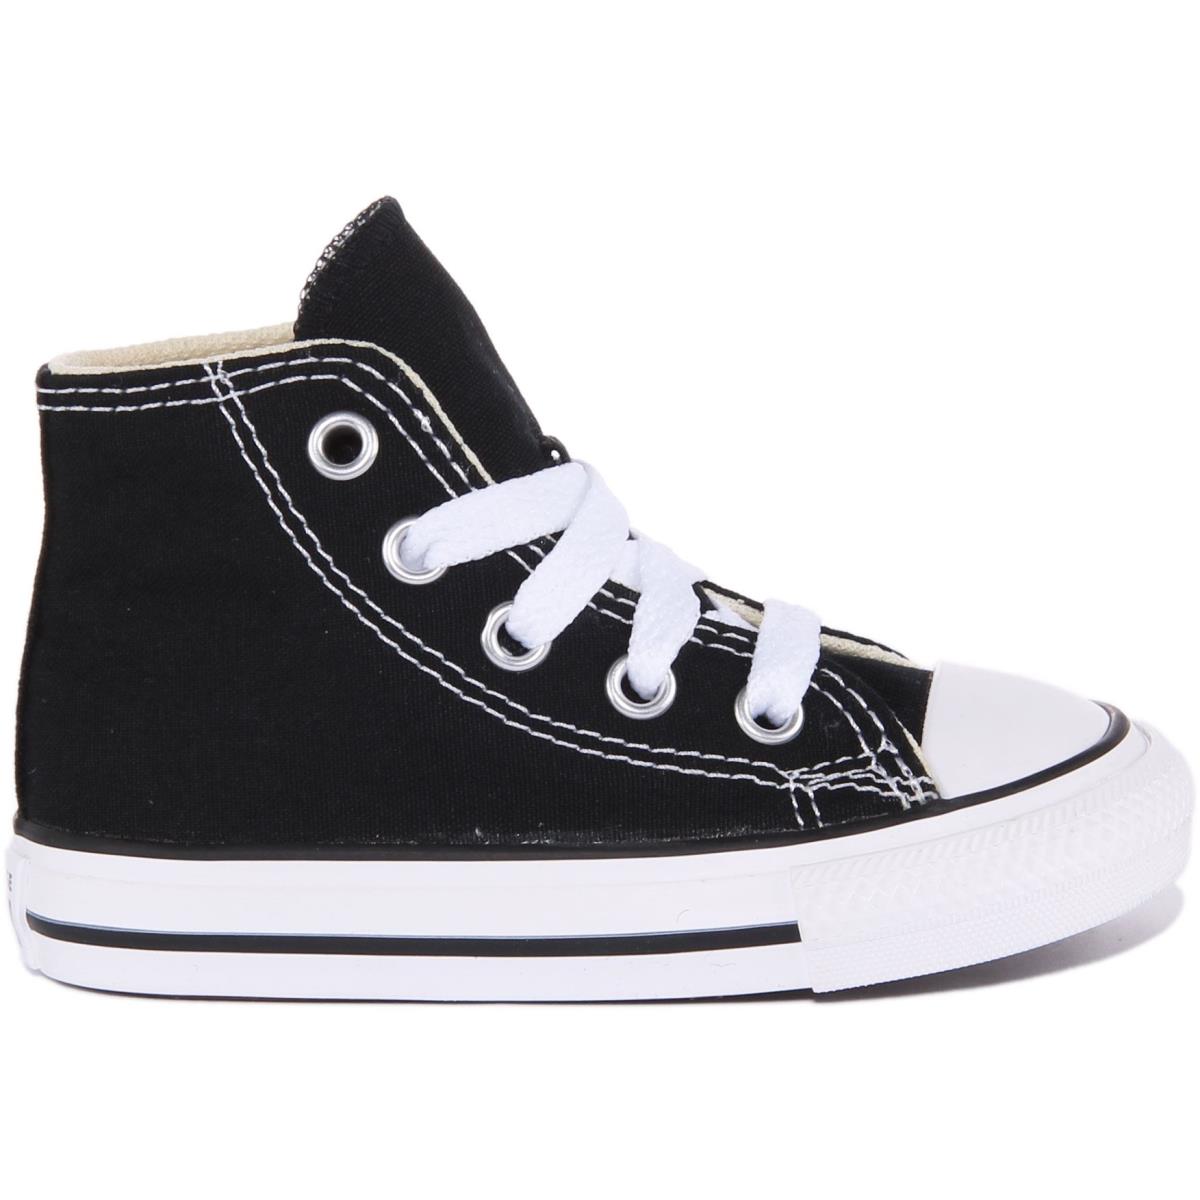 Converse Ashi Core Infants Lace Up High Top Sneakers In Black Size US 4 - 9